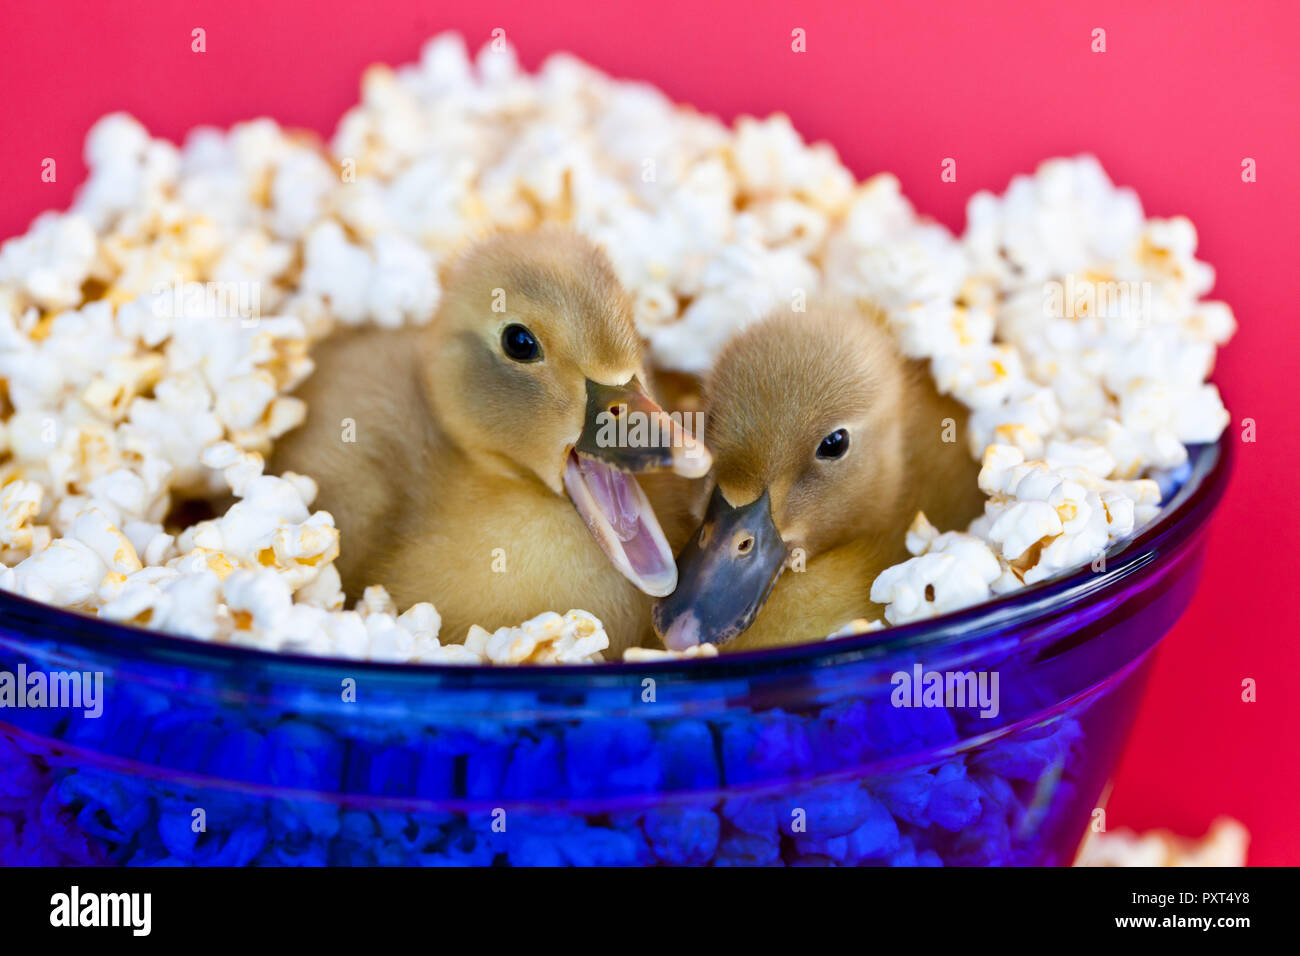 Two cute baby ducklings nestled in a blue bowl of popcorn with one quacking Stock Photo